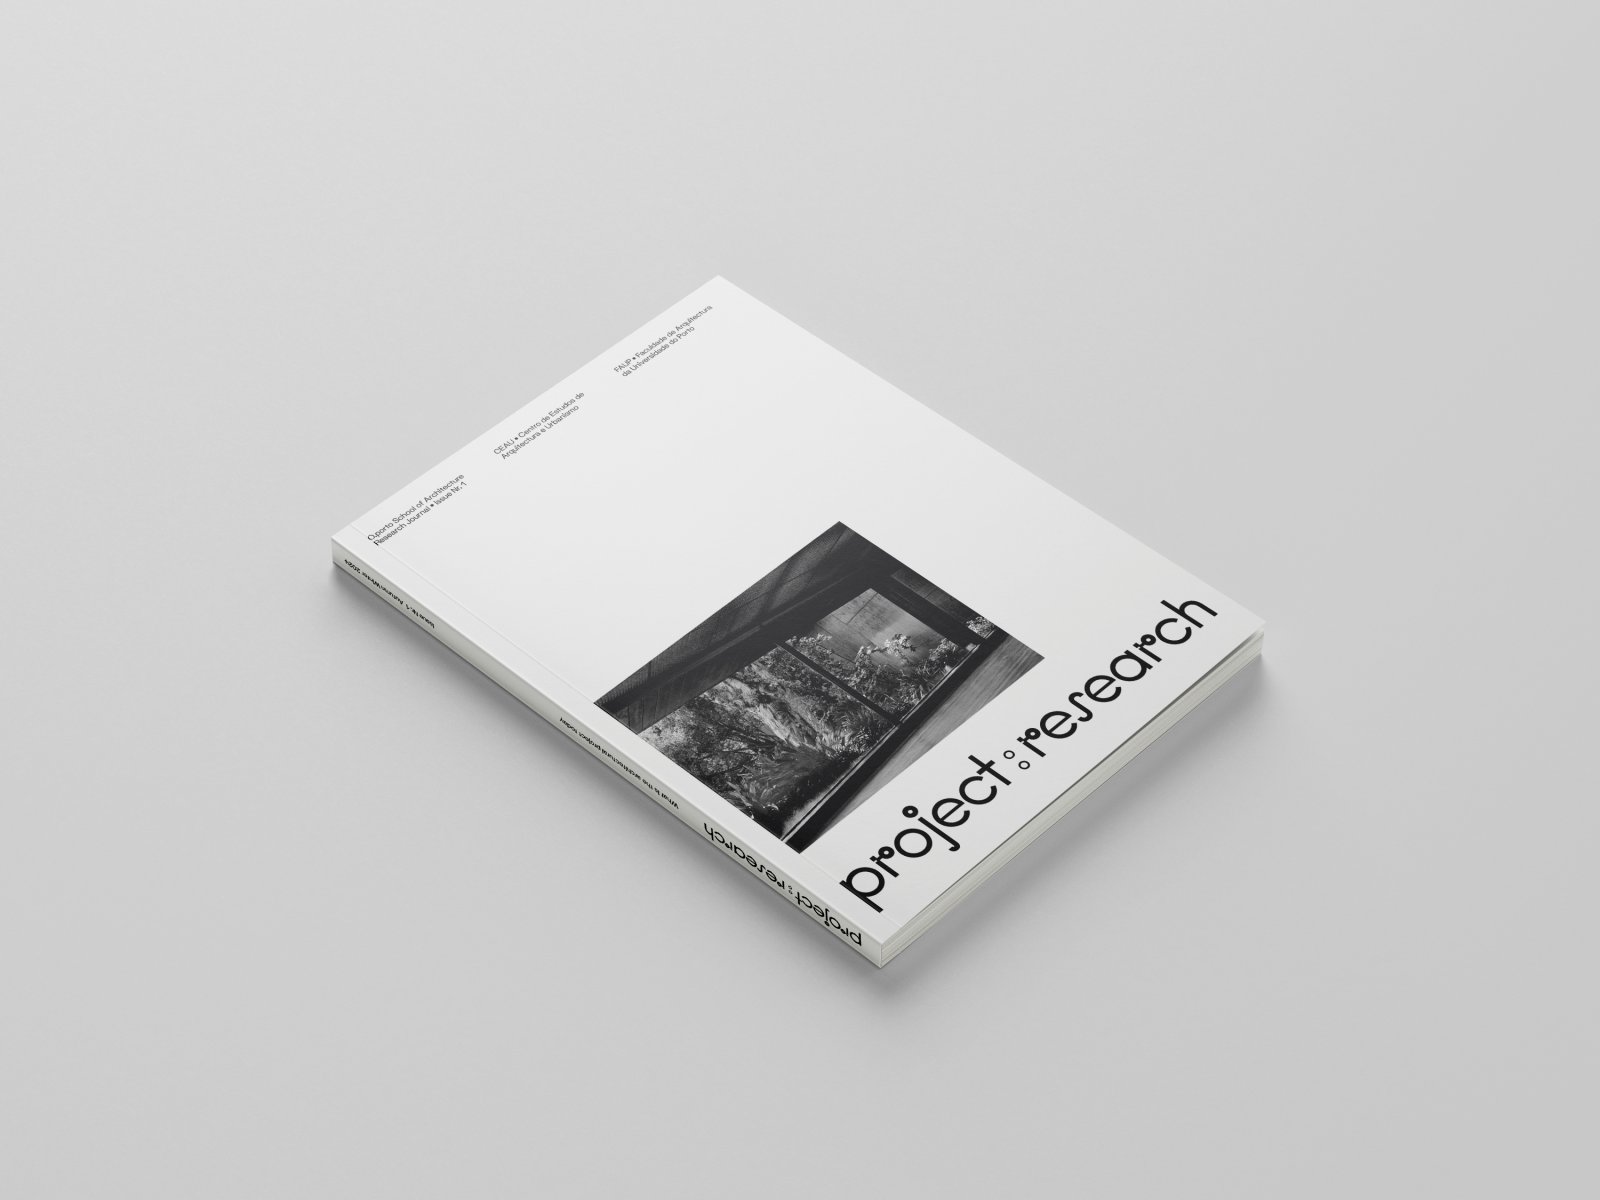 Image: Mock-up of the journal. Graphic design and logo by Joana Machado. Photograph by André Cepeda. Courtesy of both.